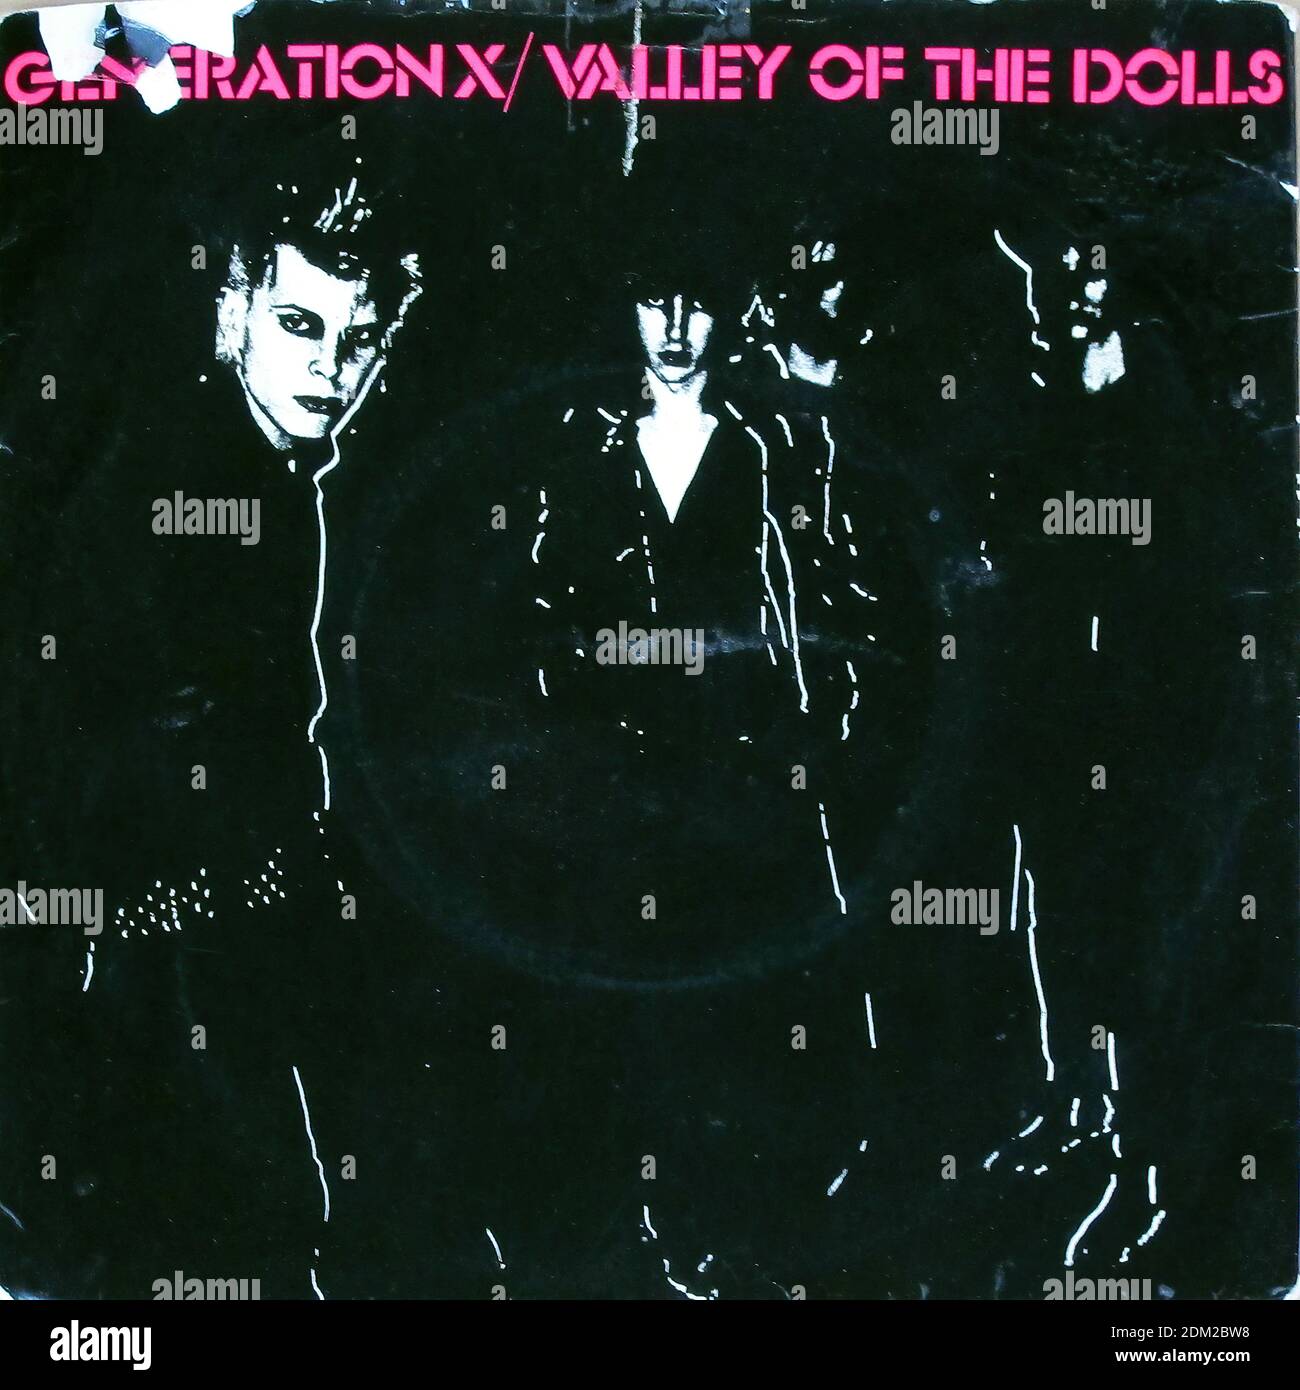 GENERATION X VALLEY OF THE DOLLS   SHAKIN' ALL OVER COLOURED VINYL BILLY IDOL 7  45RPM PS SINGLE VINYL  - Vintage Vinyl Record Cover Stock Photo